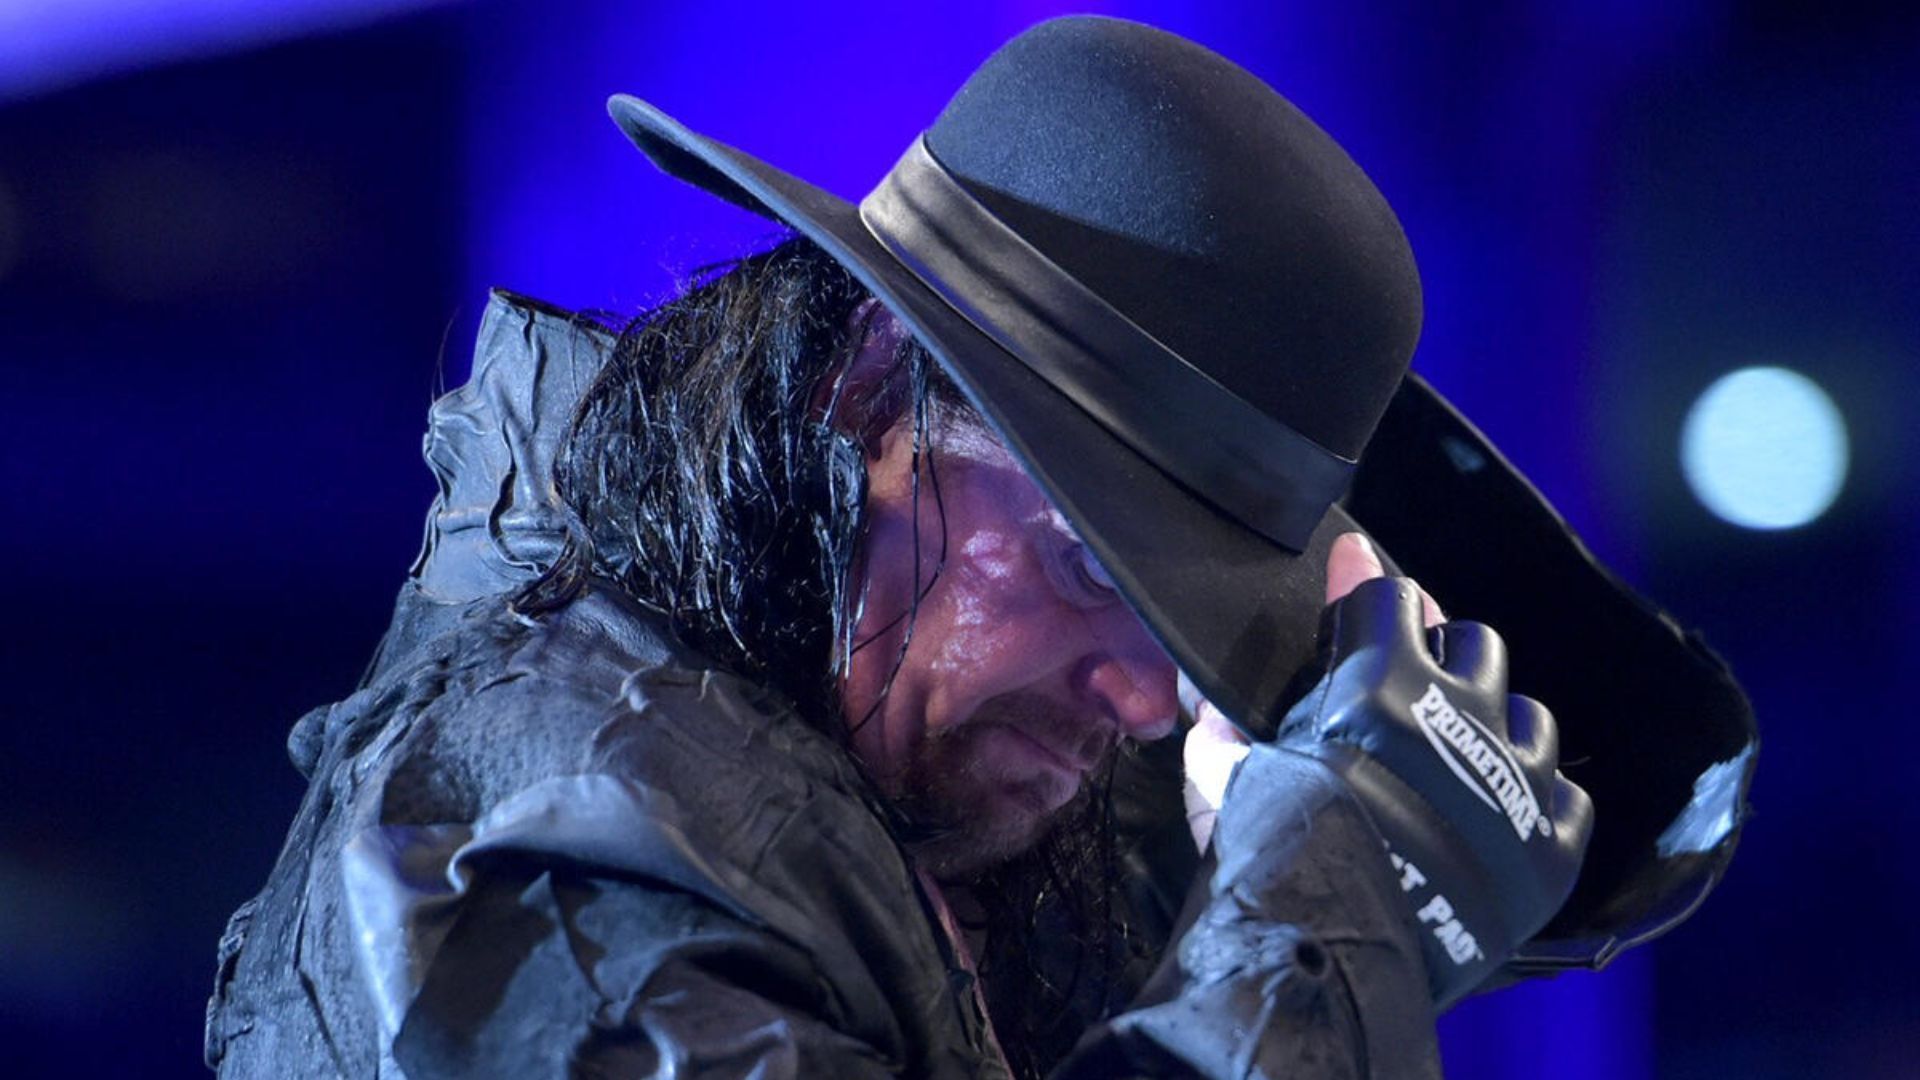 The Undertaker was best known for his WrestleMania undefeated streak. (WWE)